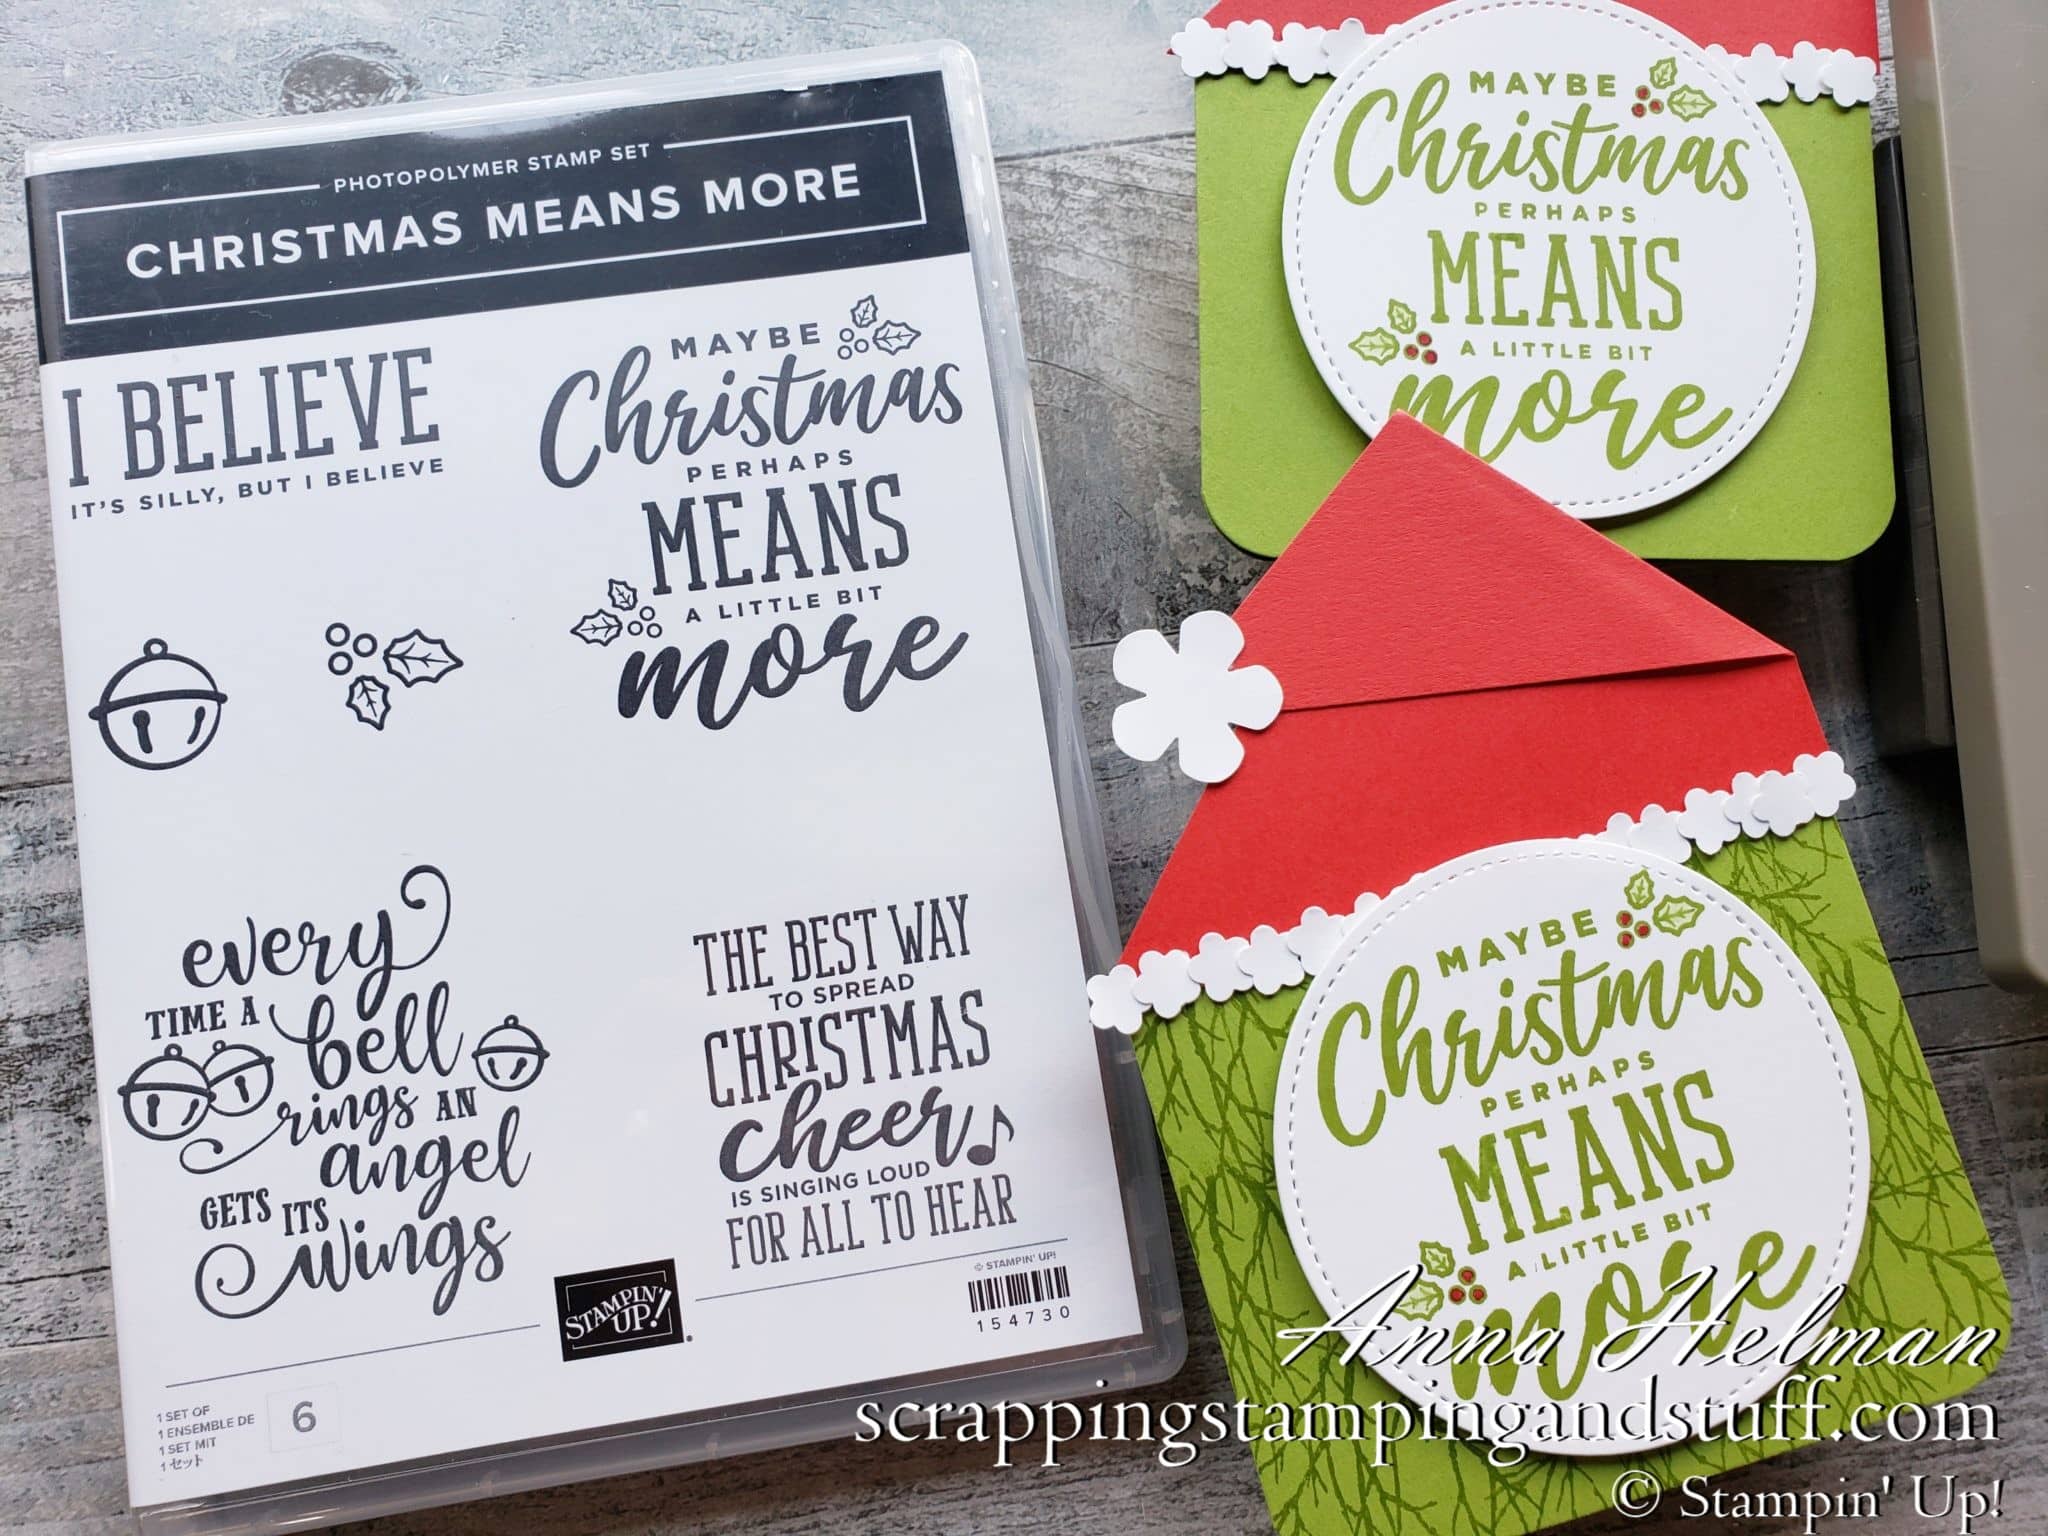 A Grinch Christmas Card With The Christmas Means More Stamp Set